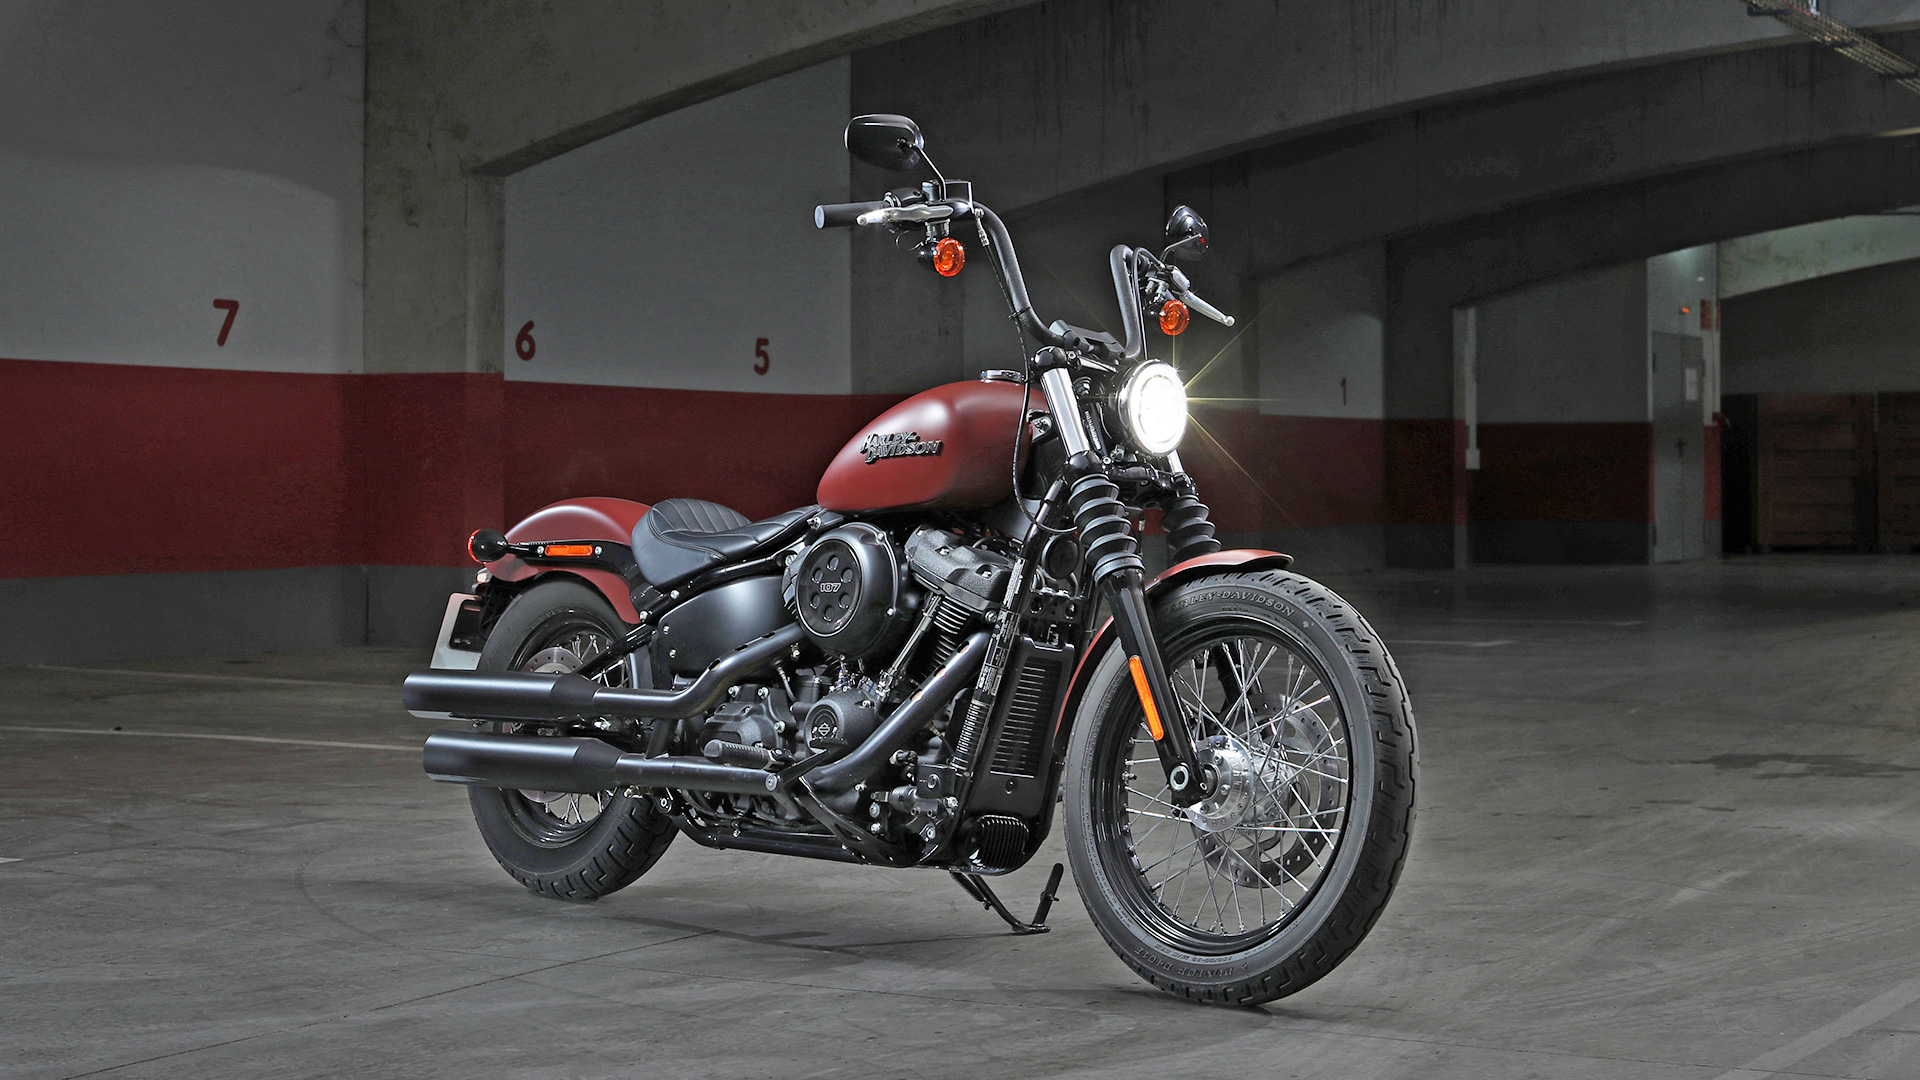 Harley Davidson Street Bob 2018 107 Price Mileage Reviews Specification Gallery Overdrive